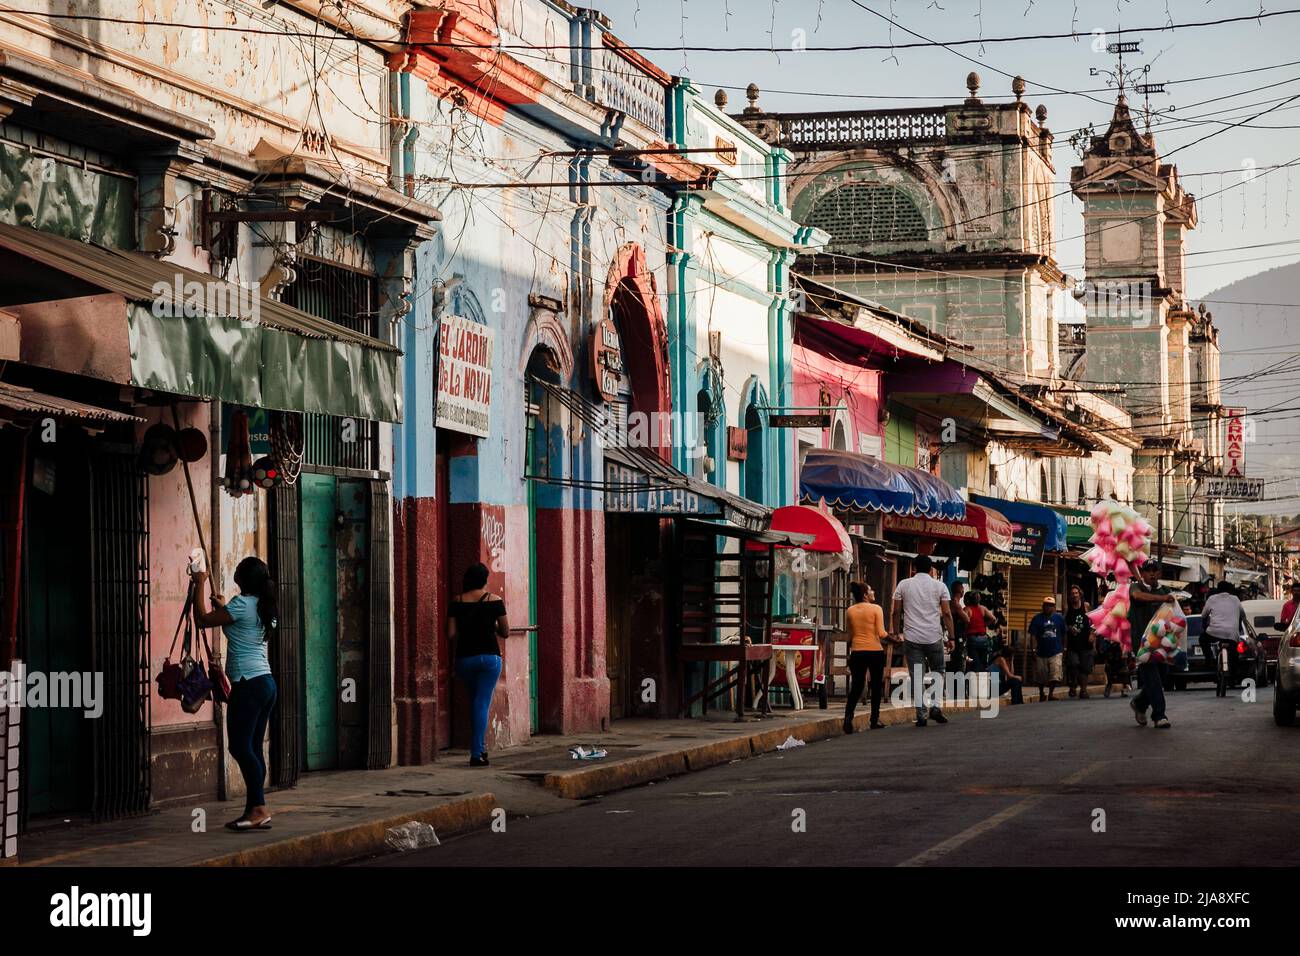 Golden hour street scene with colourful colonial buildings and church towers in hot Granada, Nicaragua. Stock Photo